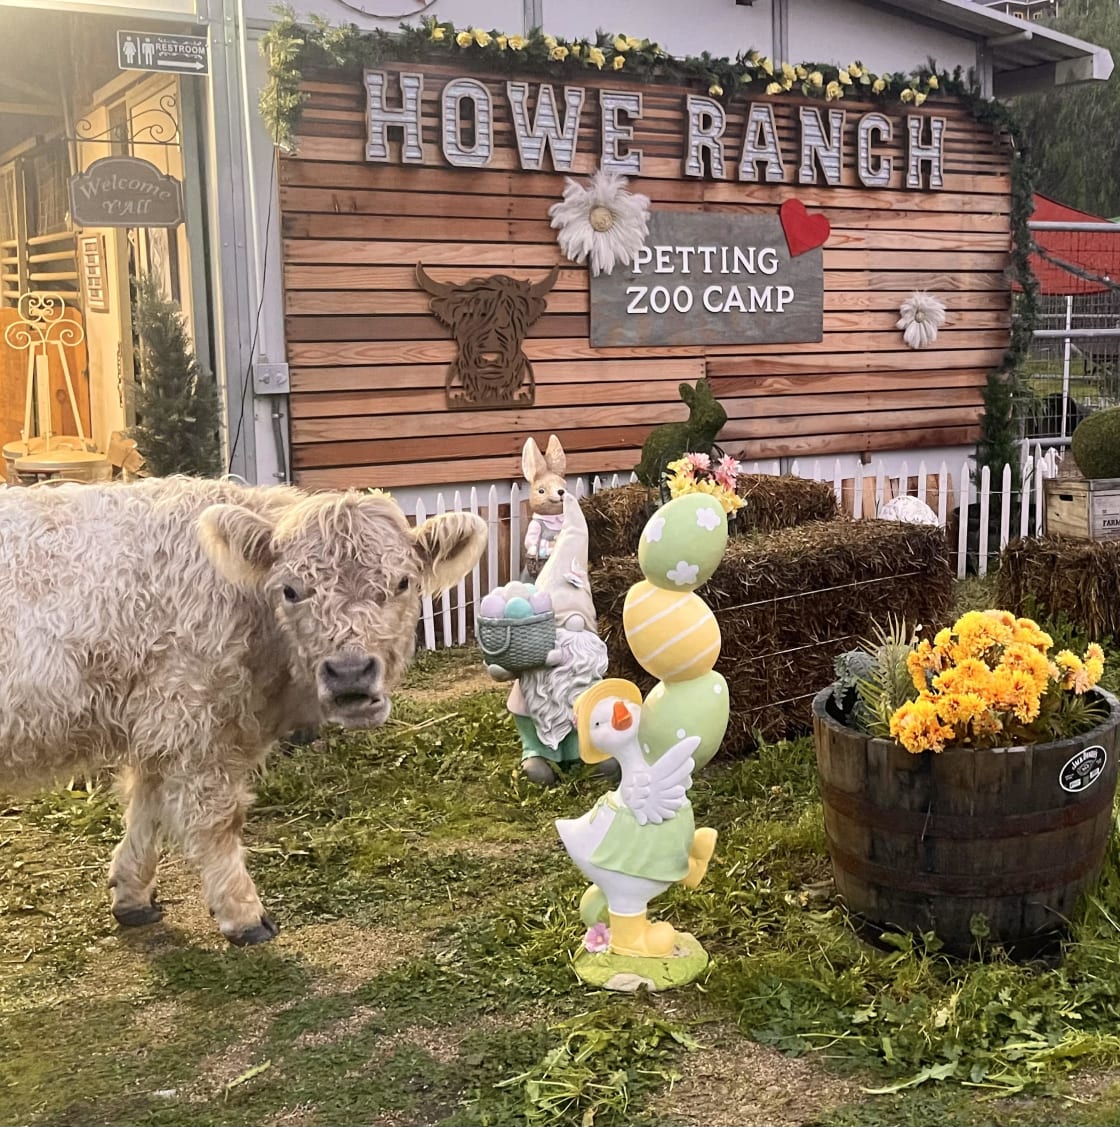 Howe Ranch Petting Zoo Camp